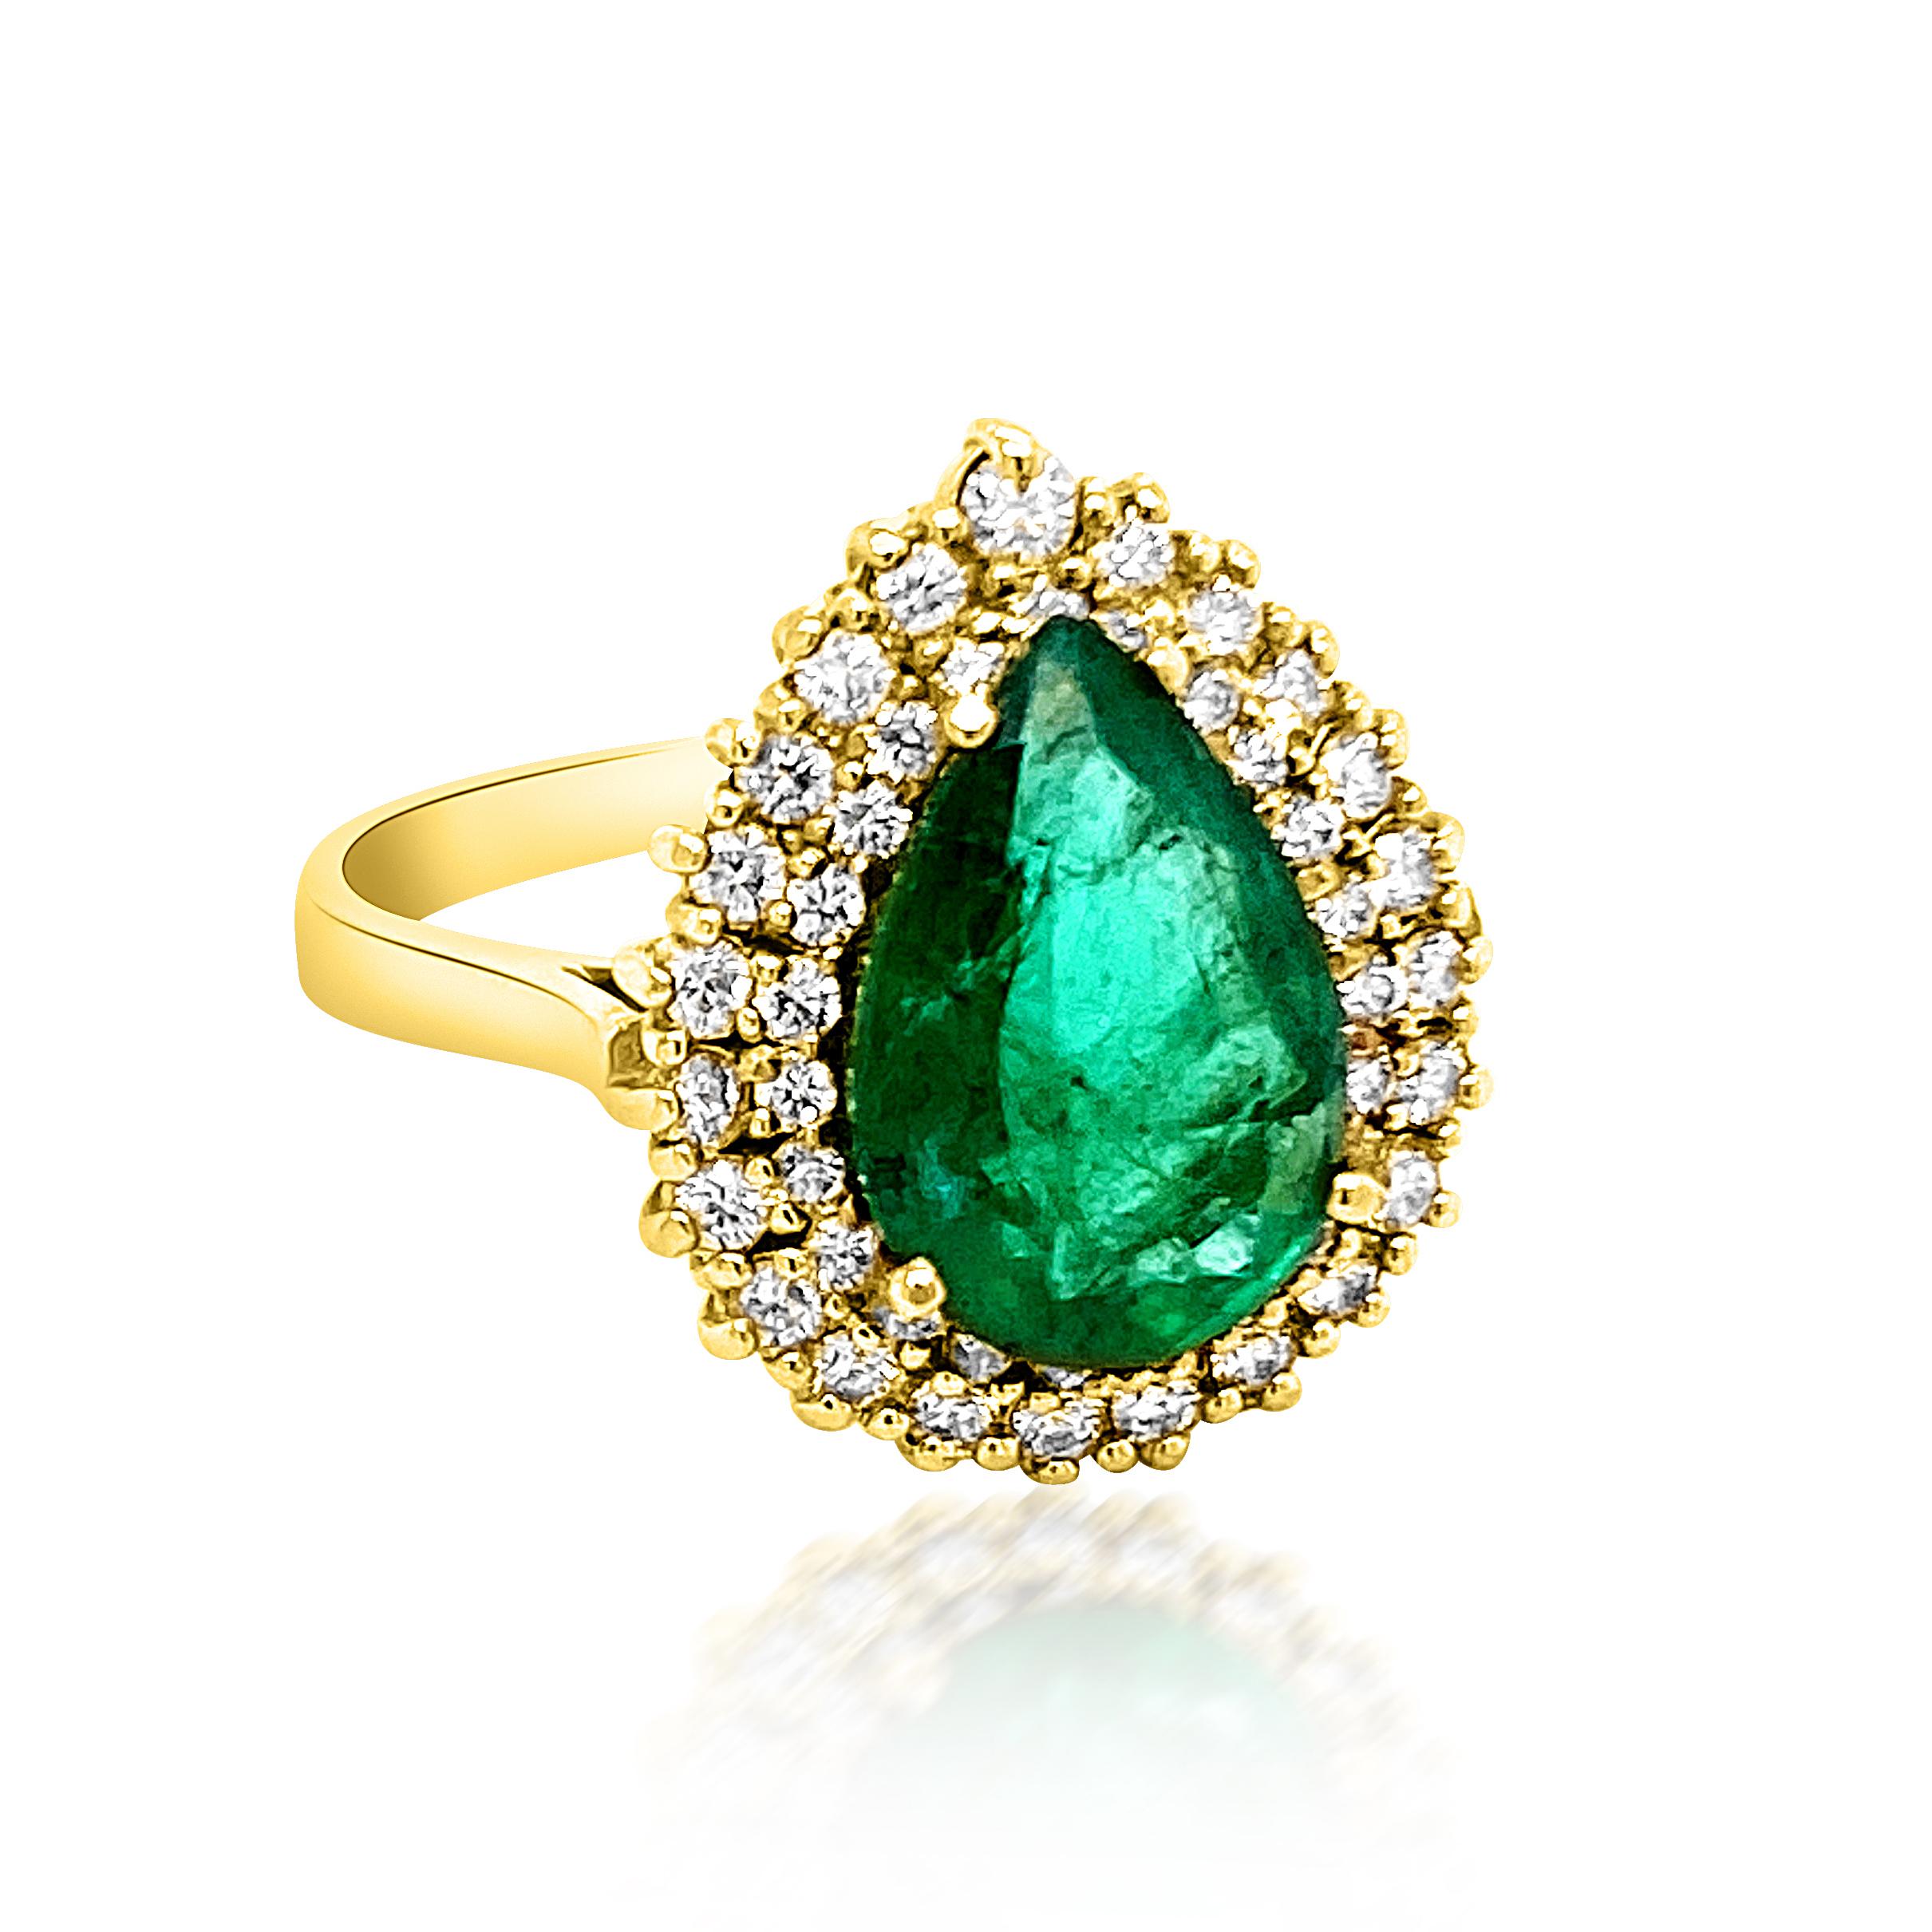 14K YELLOW GOLD NATURAL COLOMBIAN EMERALD RING:6.58GRAMS
DIAMOND:0.84CT
EMERALD:3.02CT
This 3.02ct Pear Shape Natural Emerald catches the light and gleams like rolling hills of fresh green grass after rain. Of all gemstones, Emerald is the purest